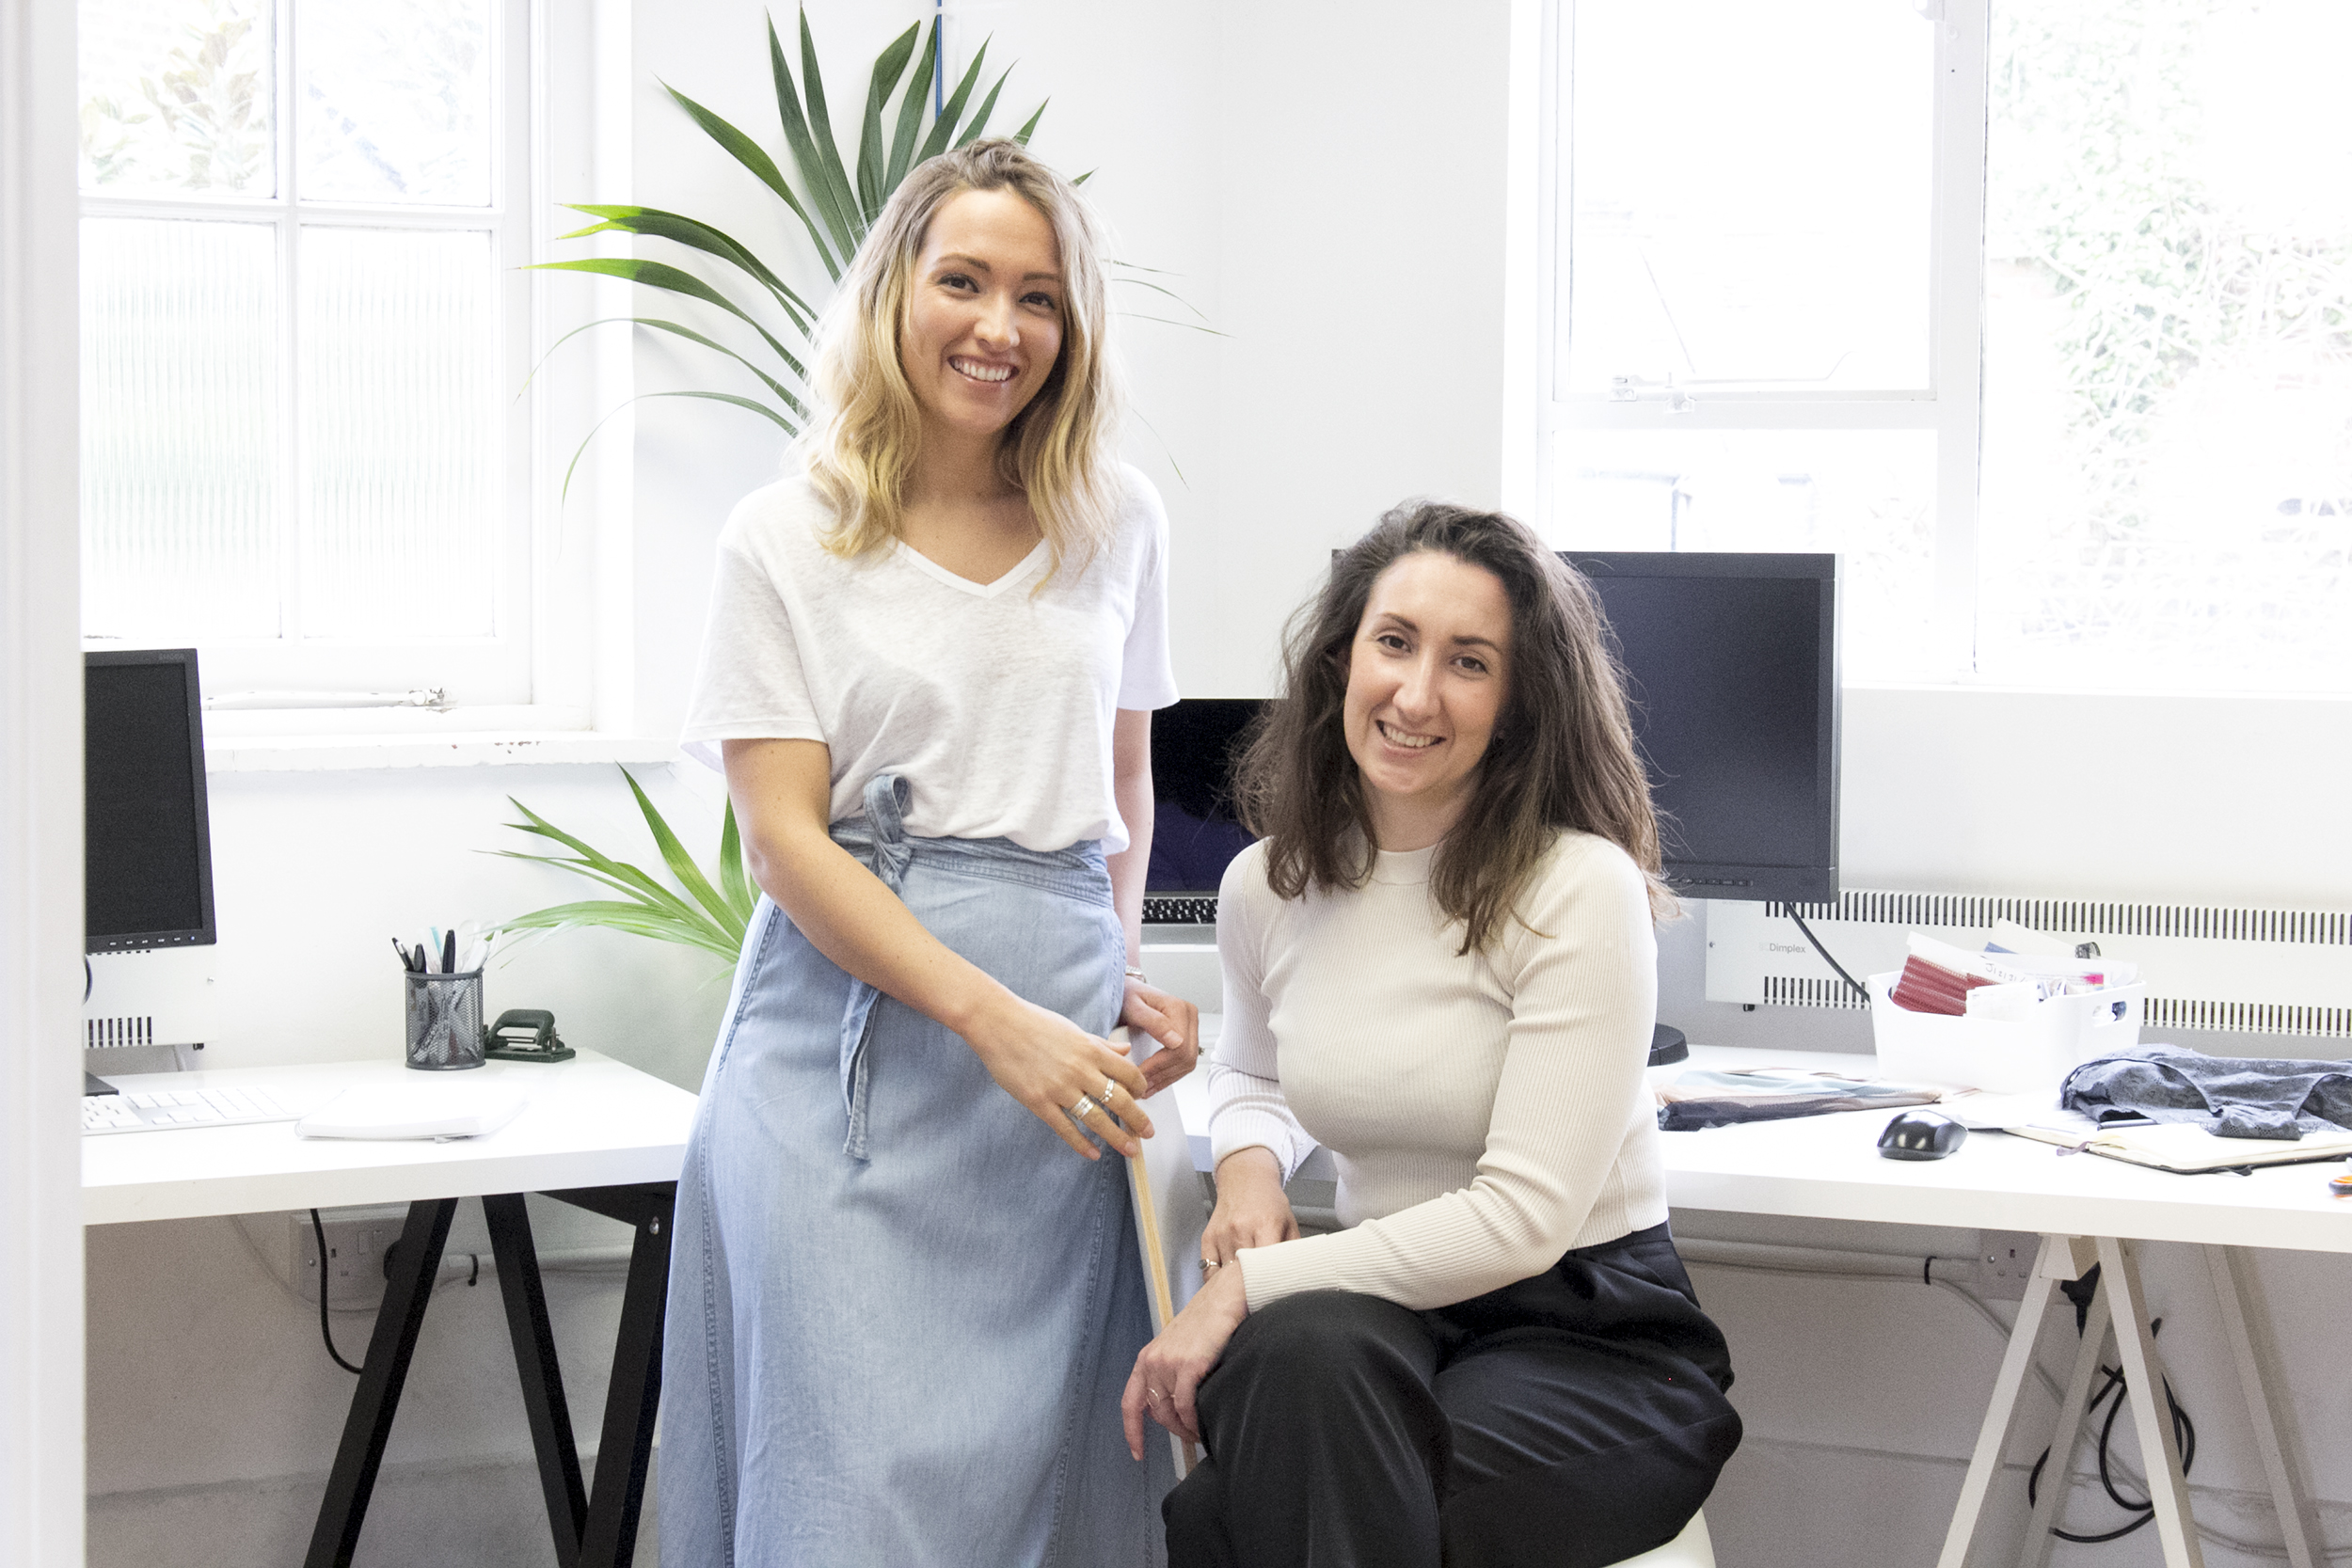 Beija London's Mazie Gardner and Abbie Miranda On Why Small Steps Equals  Greater Payoff - The Lifestyle Edit